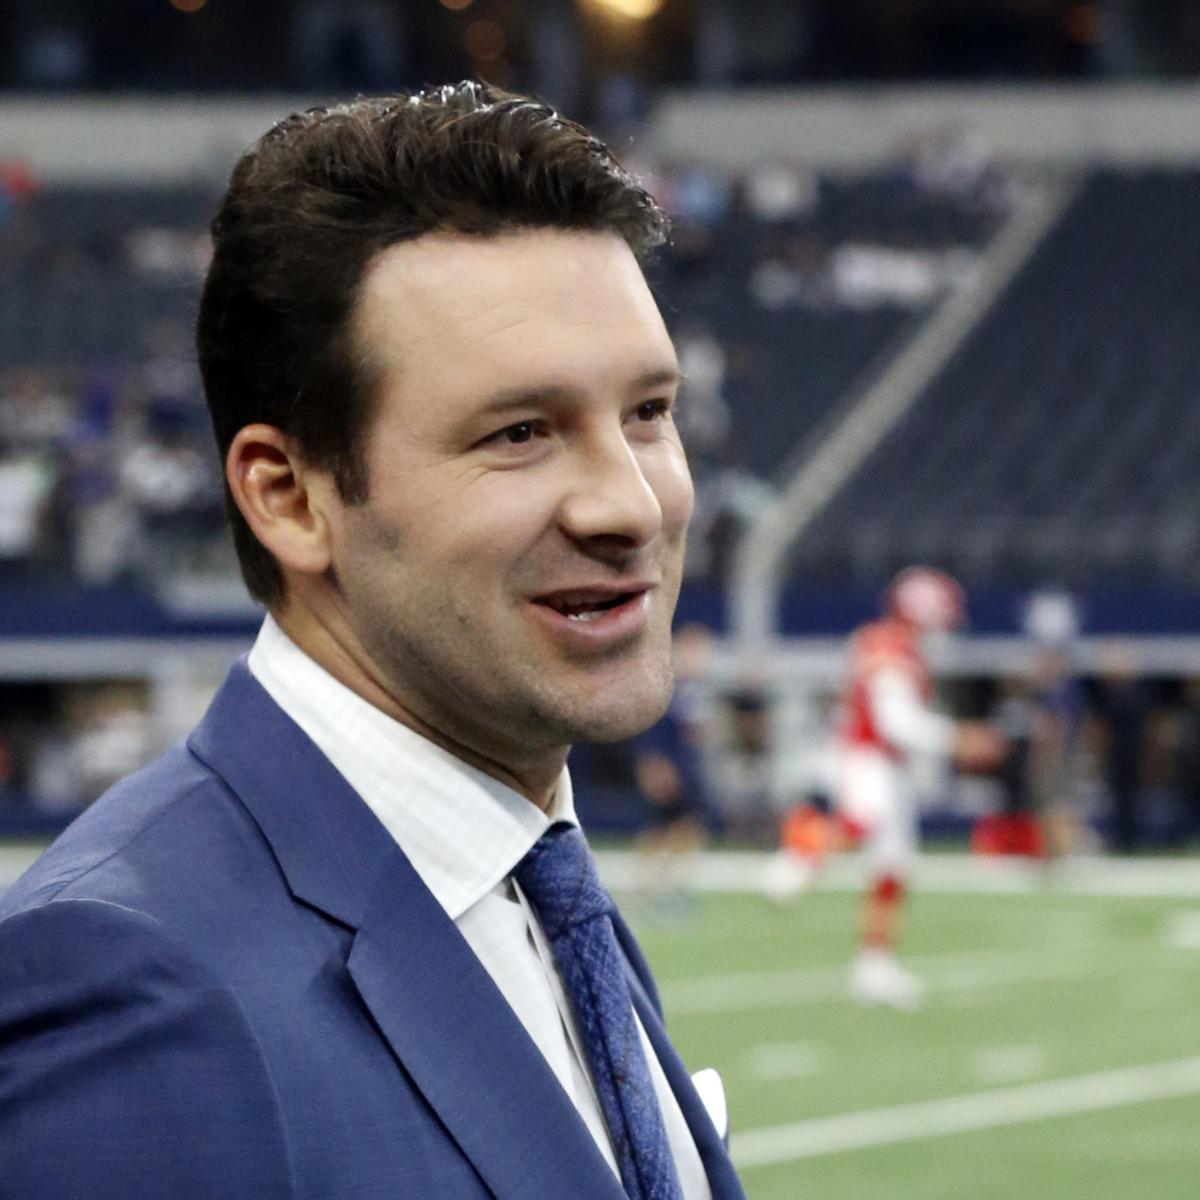 Tony Romo Reportedly Wants $10M a Year to Stay with CBS Sports as NFL ...